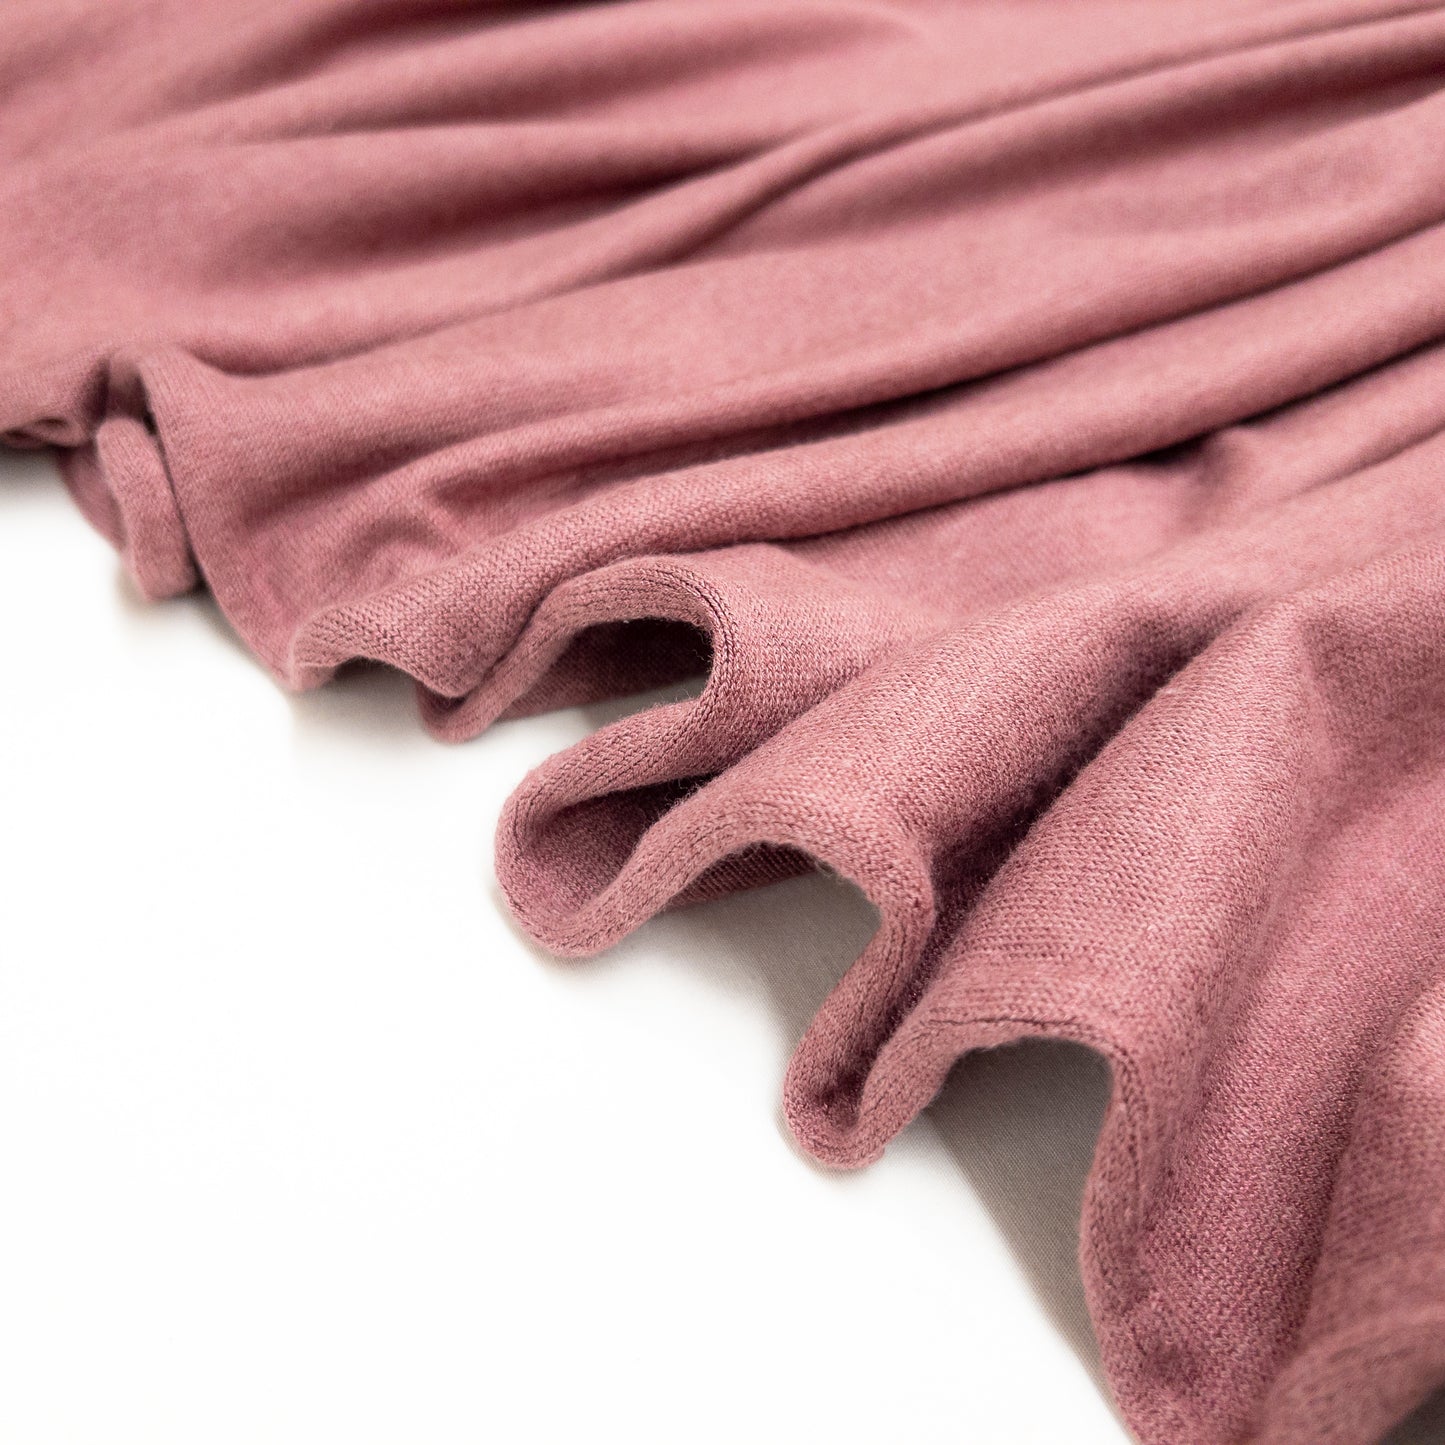 Rayon / Cotton / Modal Knit in Rose Brown